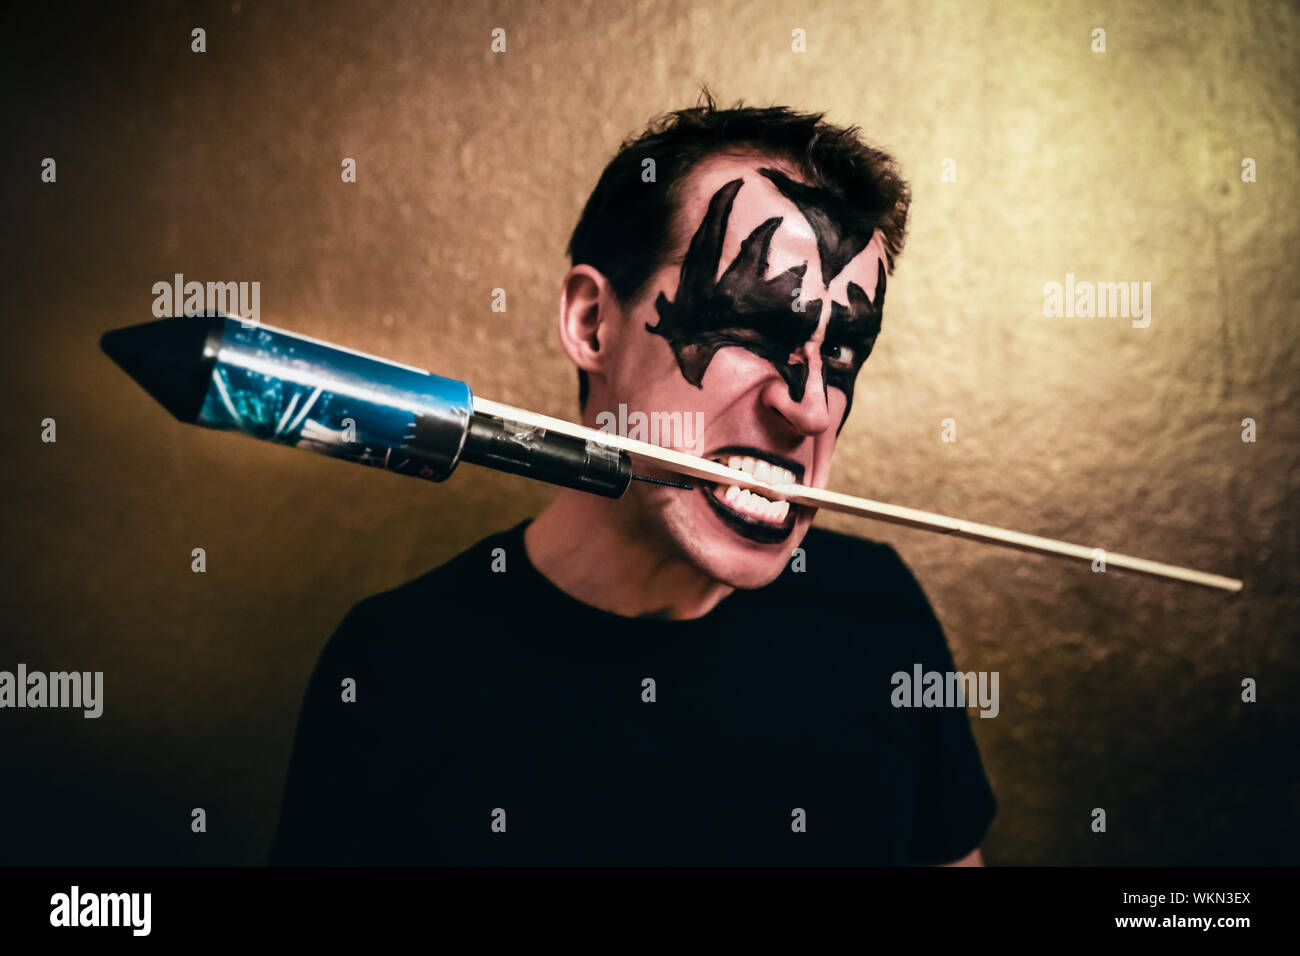 Portrait Of Man With Face Paint Carrying Explosive Material In Mouth Stock Photo